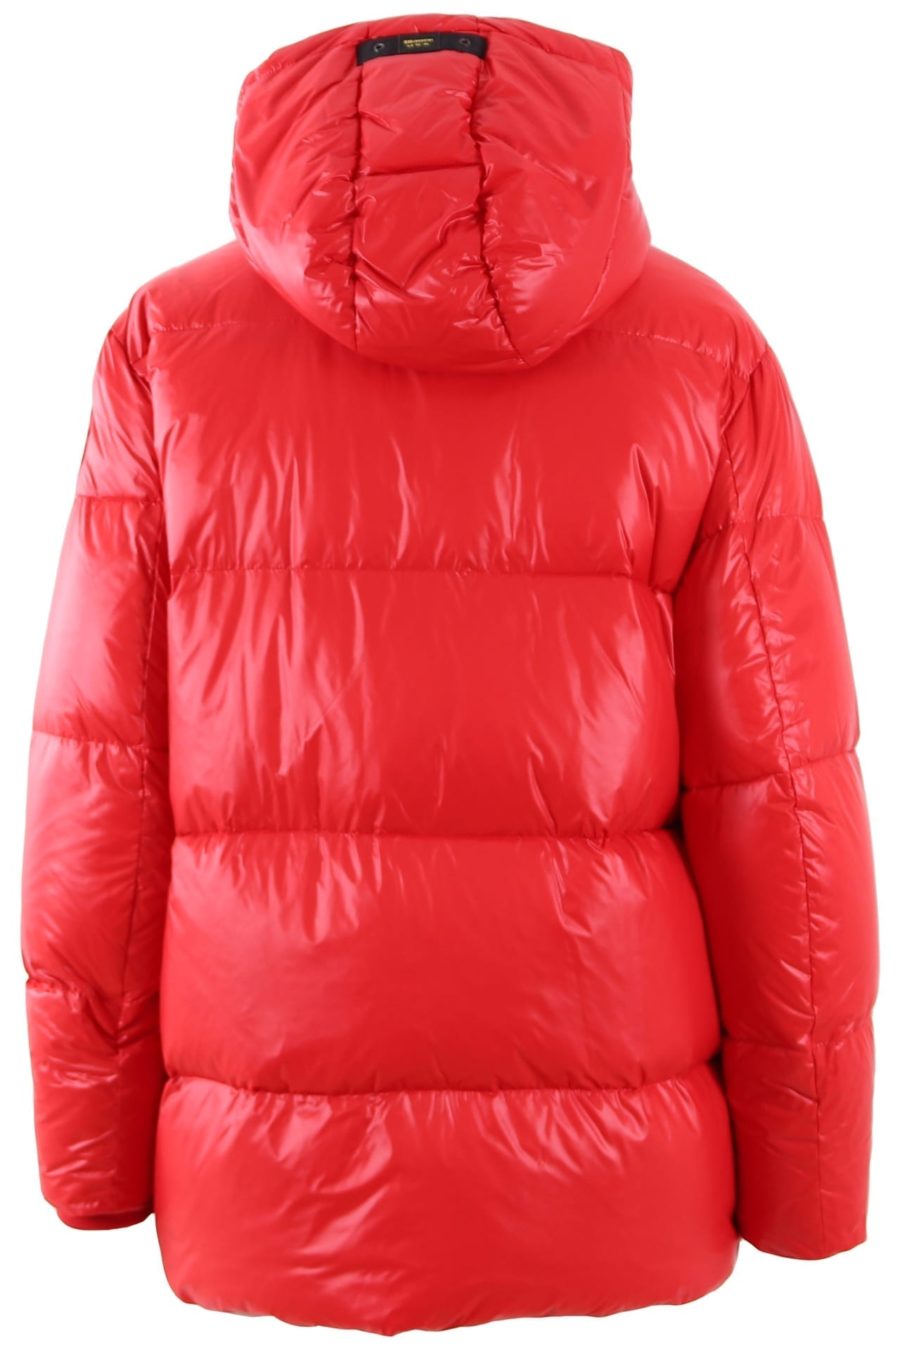 Blauer red hooded jacket with snap fasteners - 2472b15c3acfa04f77ddfc28511e5e54720e1cd9